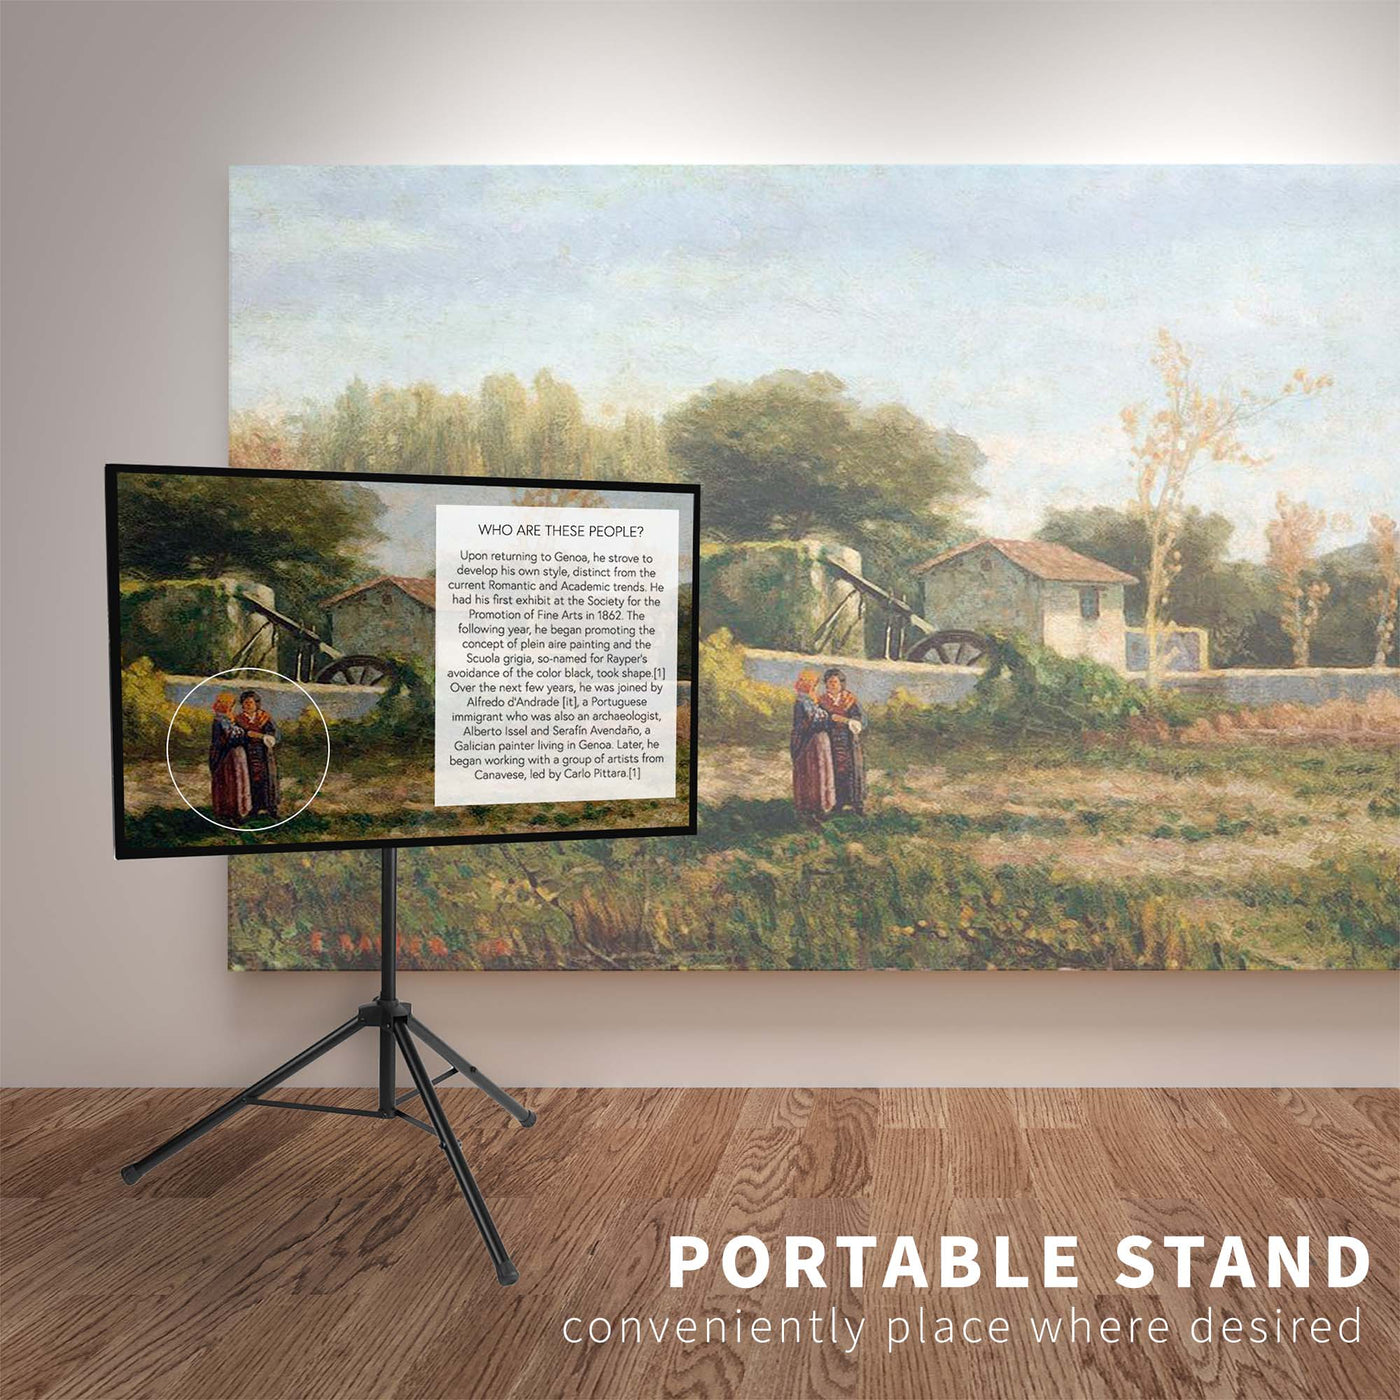 Portable TV stand in an art gallery displaying information in a modern changeable space. 7- Stable tripod base of the stand is suitable for slightly uneven surfaces offering three points of surface support.